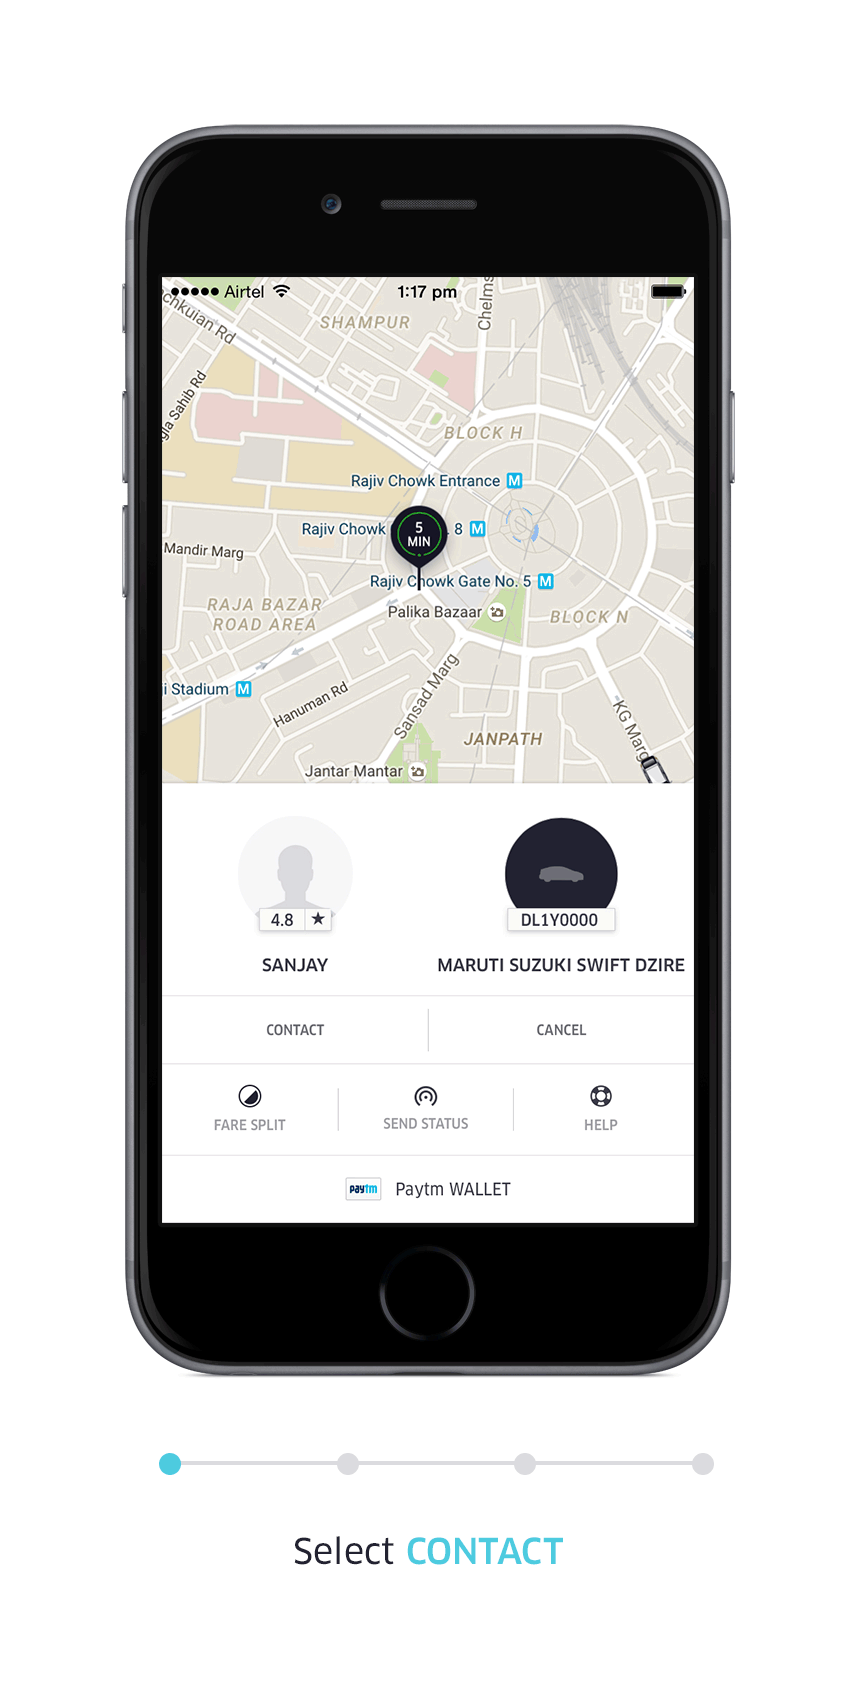 Uber has rolled out some key features in India to ensure  passenger safety in their cabs.